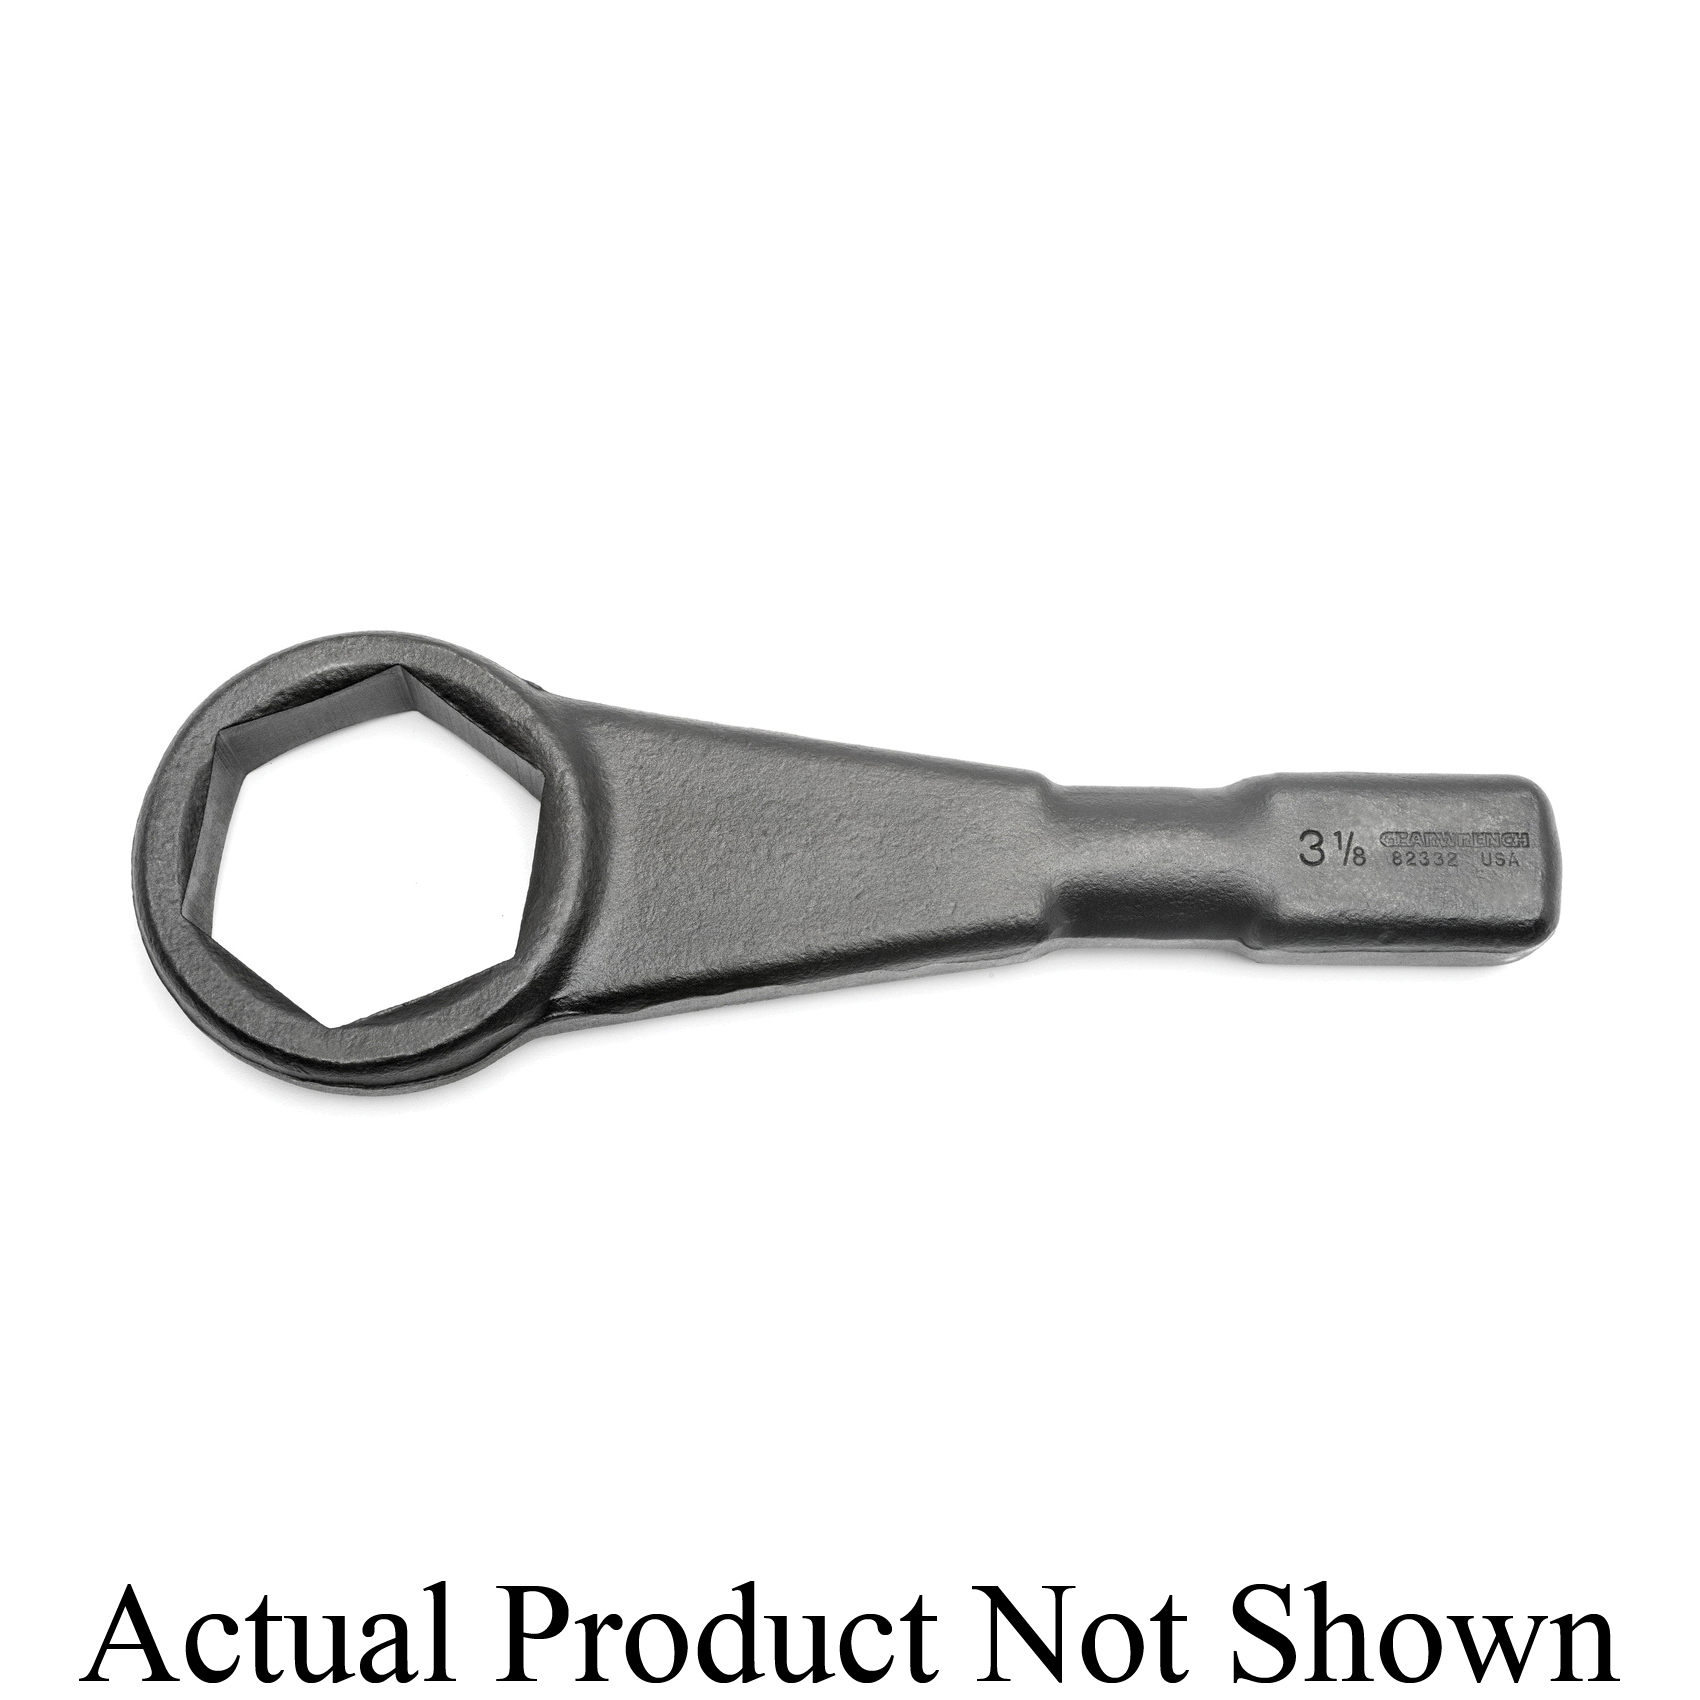 GEARWRENCH® 82326 Slugging Wrench, 2 in Non-Ratcheting Wrench, US Federal Specification GGG-W-636E, 6 Points, Single End Head, 1-7/32 in THK Box End, 11.69 in OAL, Black Oxide redirect to product page